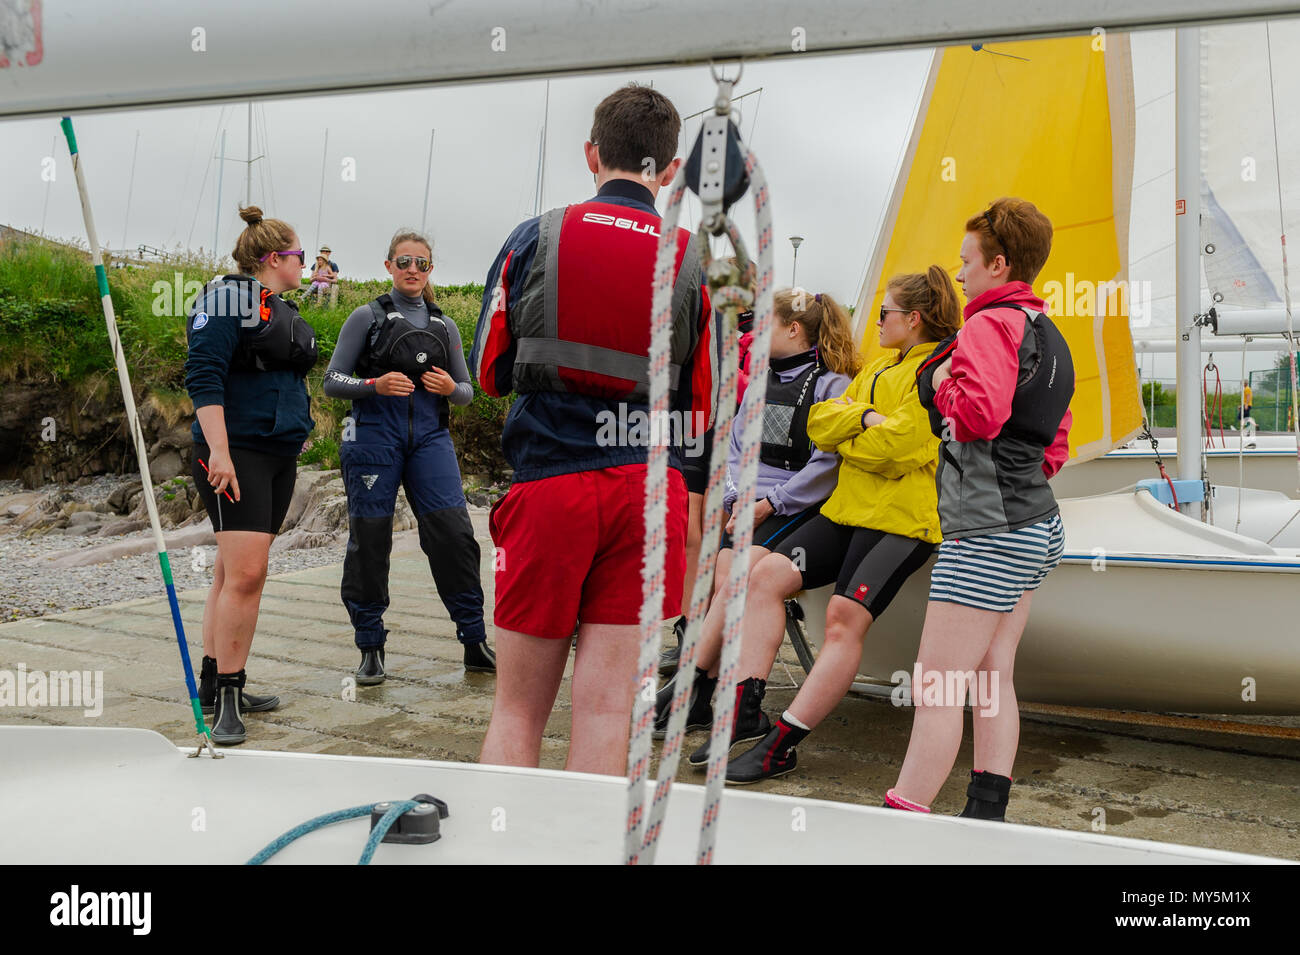 Schull, Ireland. 6th June, 2018. After a dull and overcast start this morning, the sun will burn off the clouds and make an appearance this afternoon giving highs of 21 C. Participants undertaking a Dinghy Instructor Course at Fastnet Marine Outdoor Education Centre in Schull listen to a safety briefing as part of their training.  Credit: Andy Gibson/Alamy Live News. Stock Photo